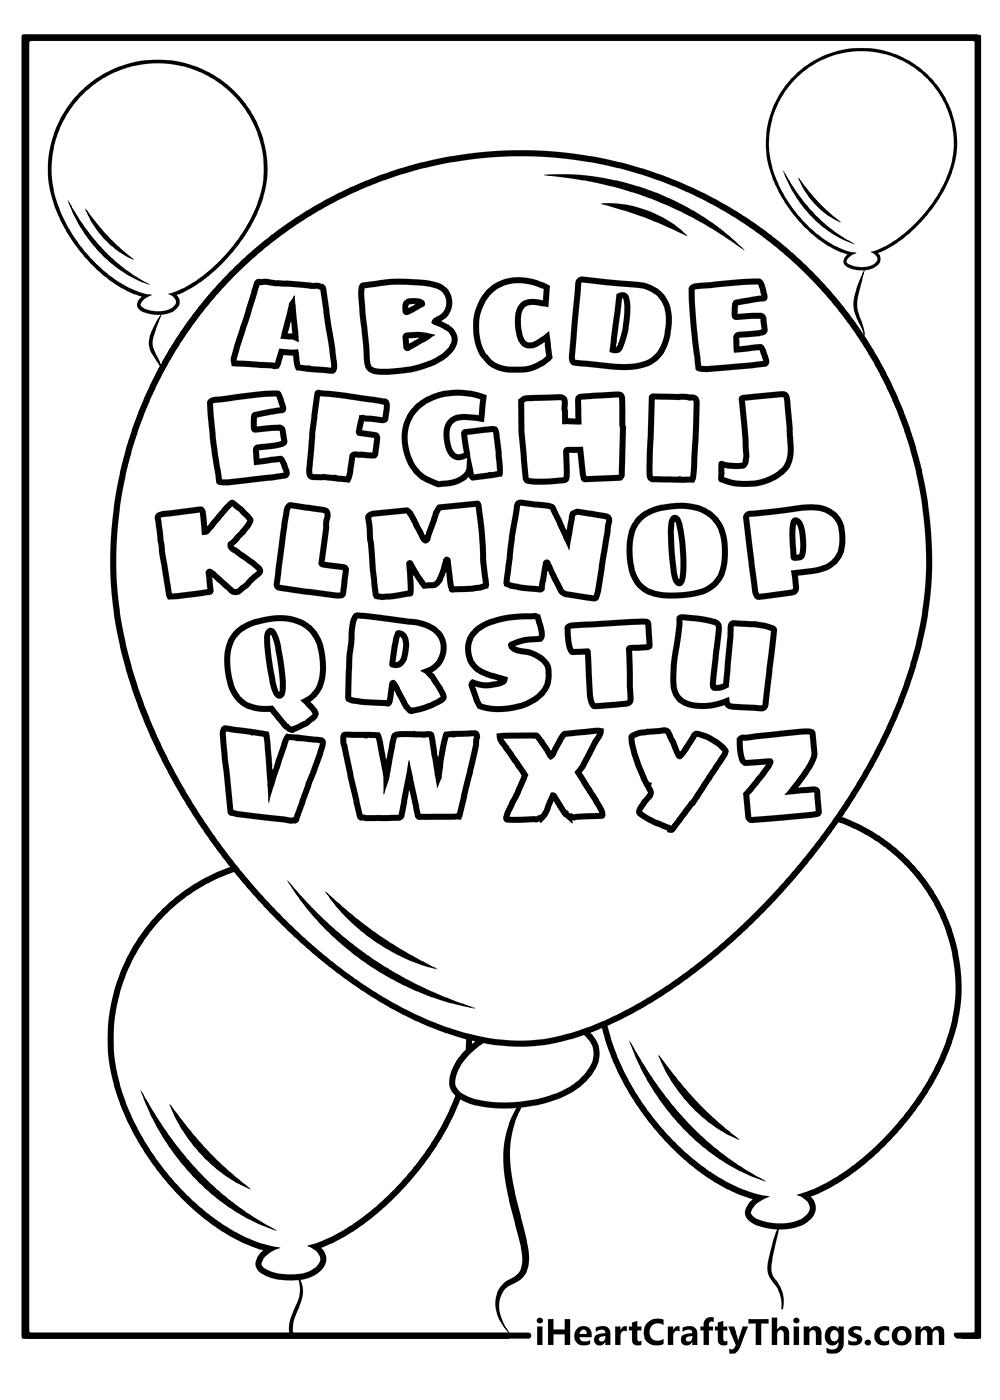 Alphabet Coloring Pages for prescholers free download